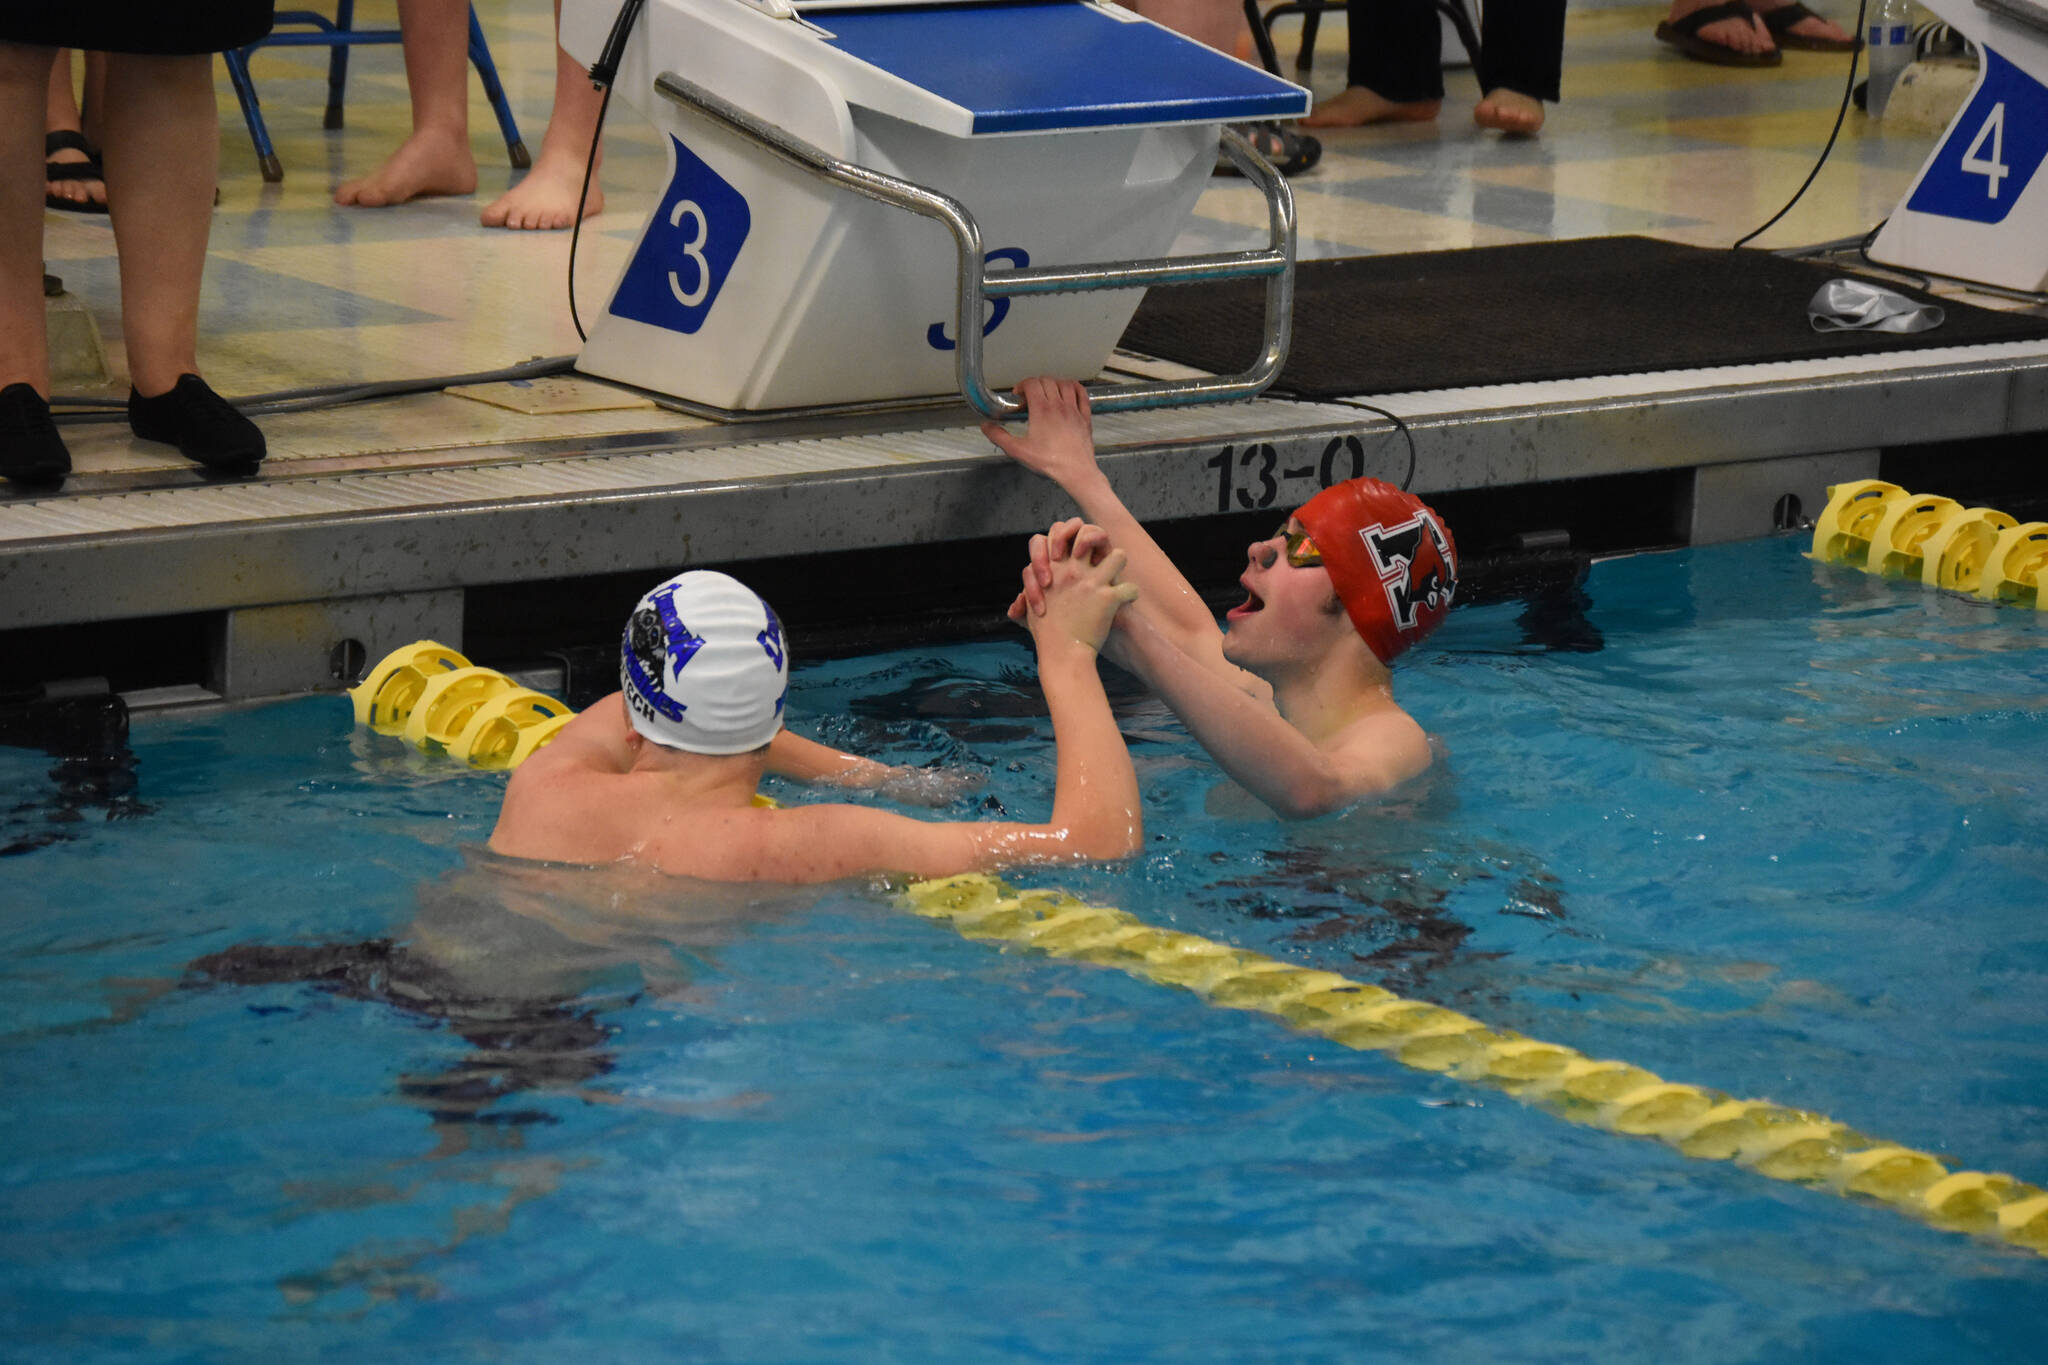 Samuel Anderson, of Kenai, and Trent Fritsch, of Cordova, celebrate after completing the 100-yard backstroke during finals at the ASAA State Swim & Dive Championships on Saturday, Nov. 5, 2022, at Bartlett High School in Anchorage, Alaska. (Jake Dye/Peninsula Clarion)